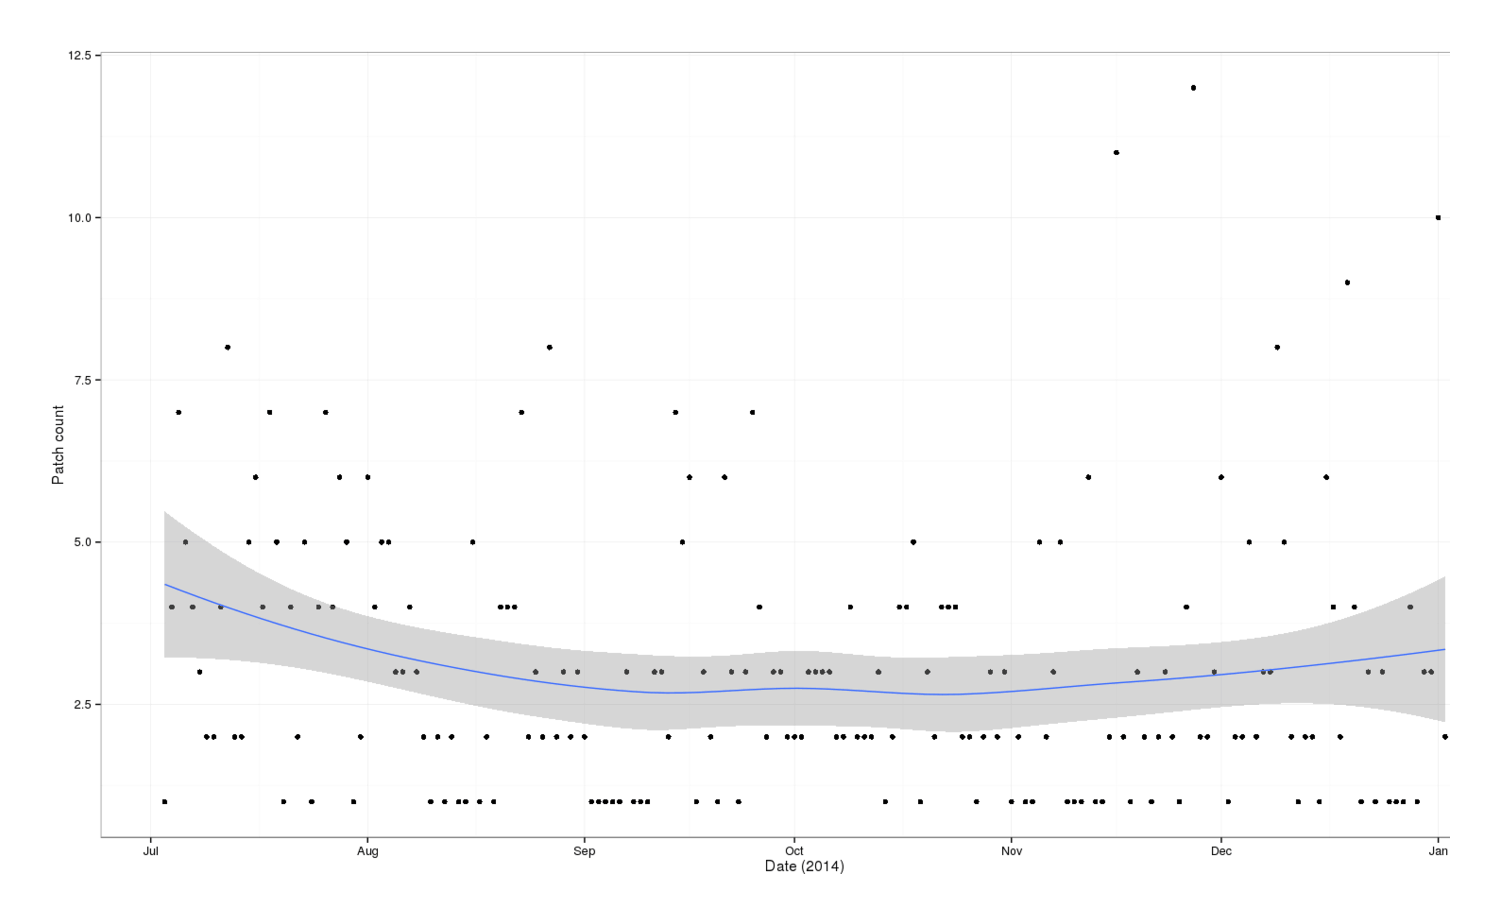 Plot of patch creations (y-axis) versus date (x-axis): July 2014 to January 2015